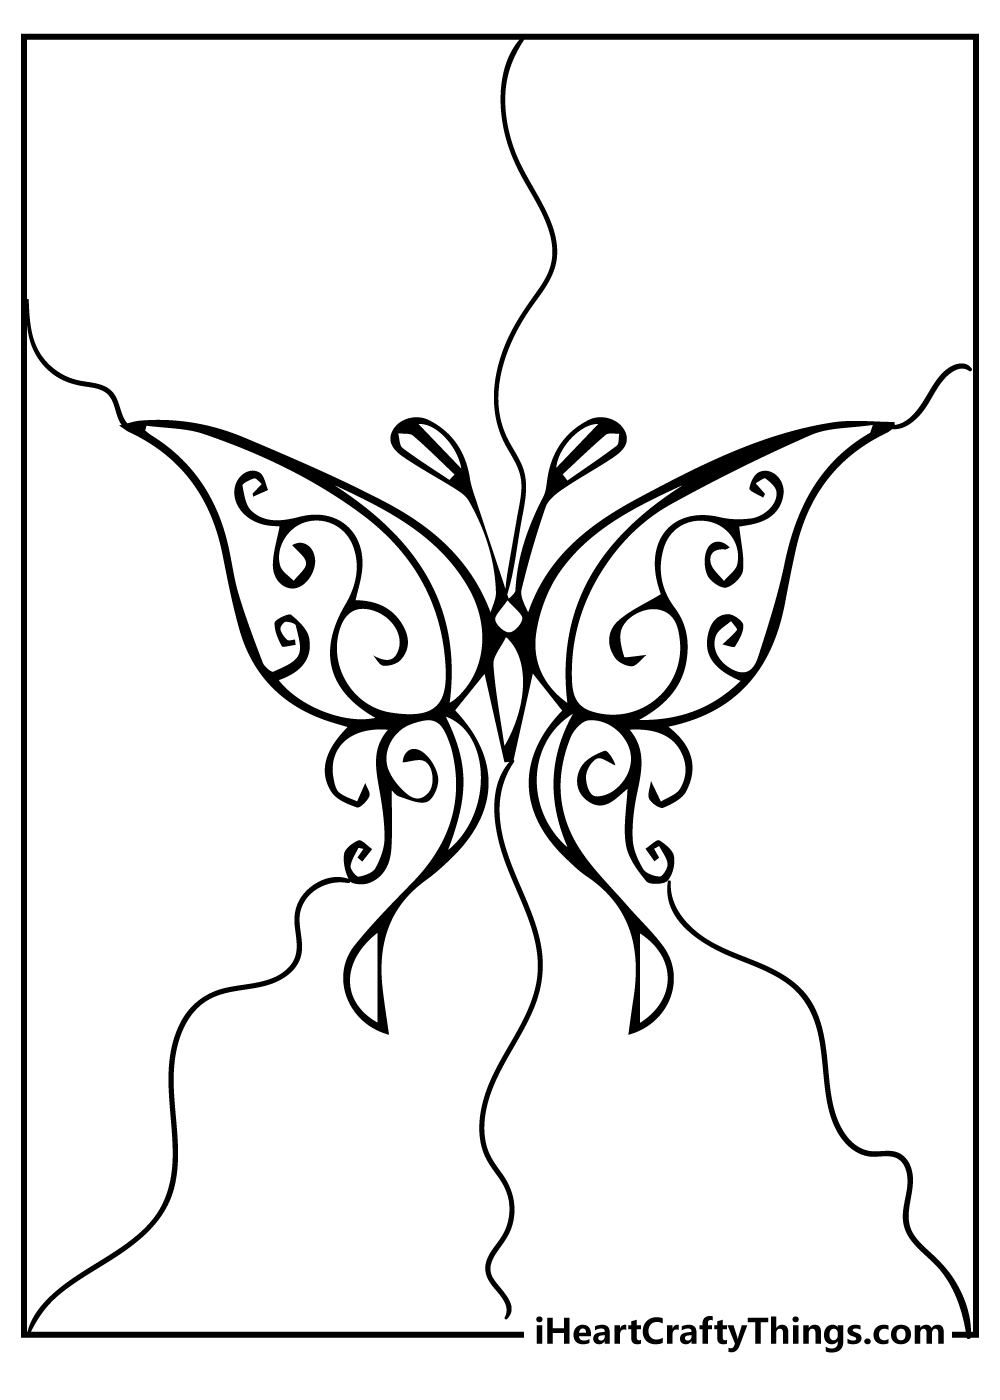 Butterfly Coloring Pages for adults